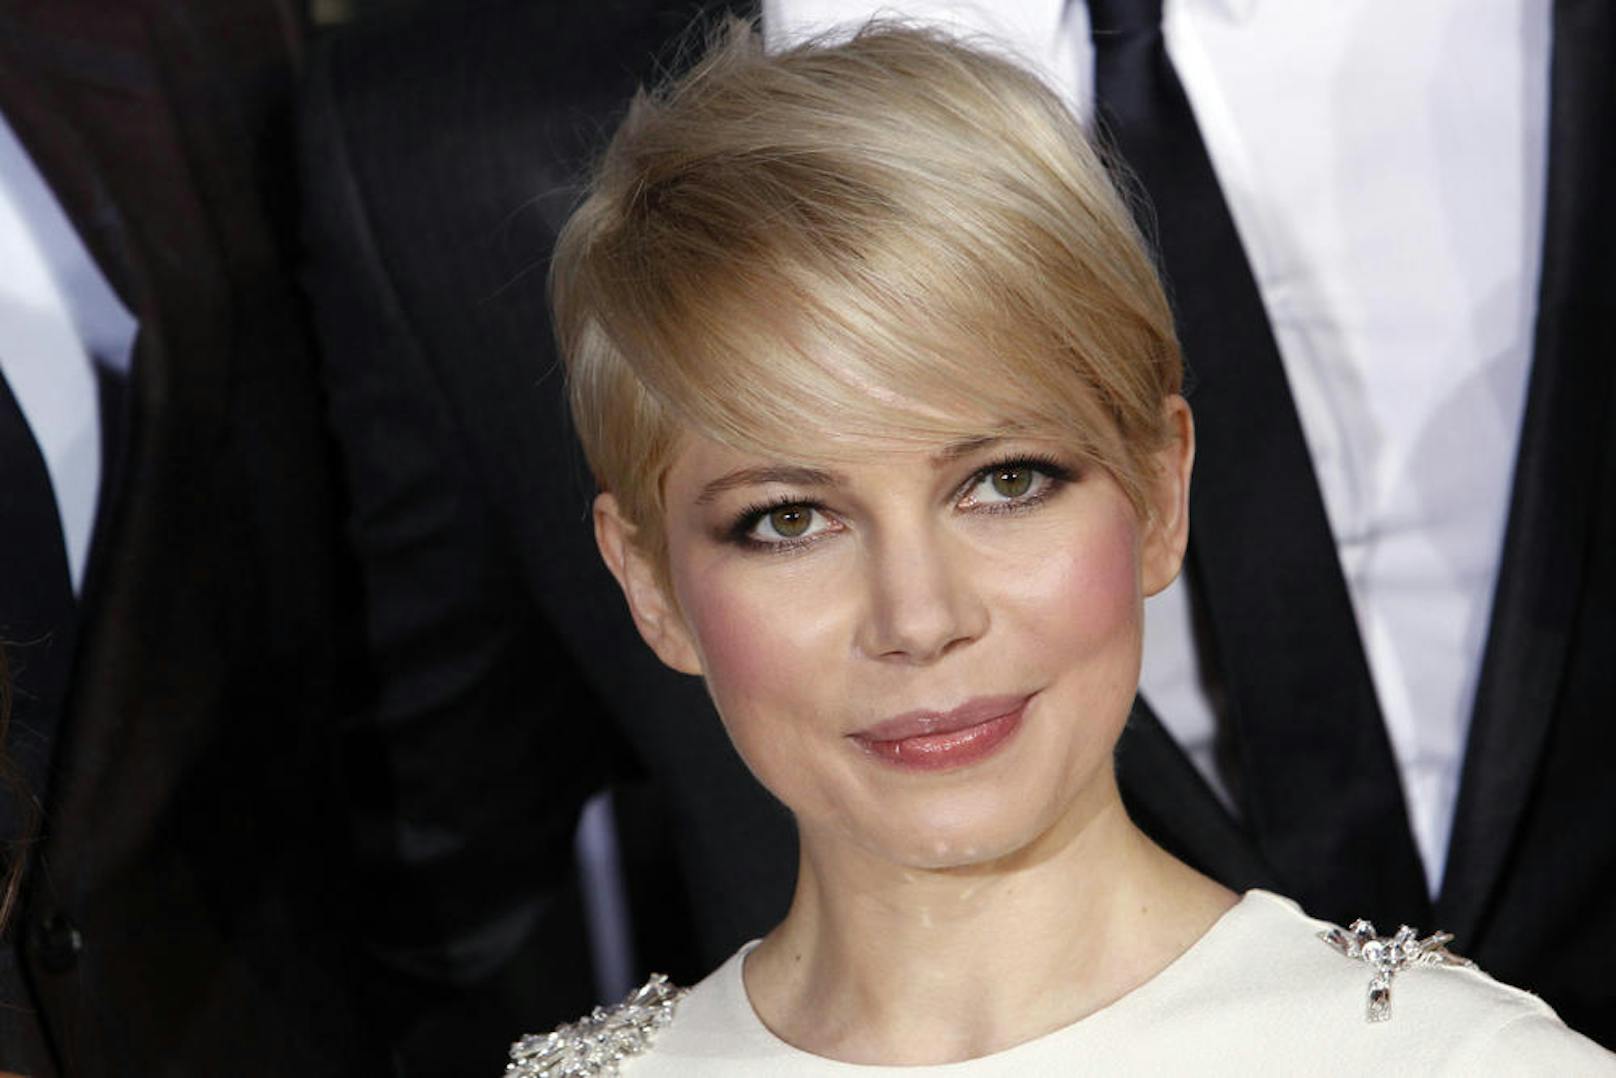 Michelle Williams bei der Premiere von "Oz the Great and Powerful" in Hollywood, 2013.